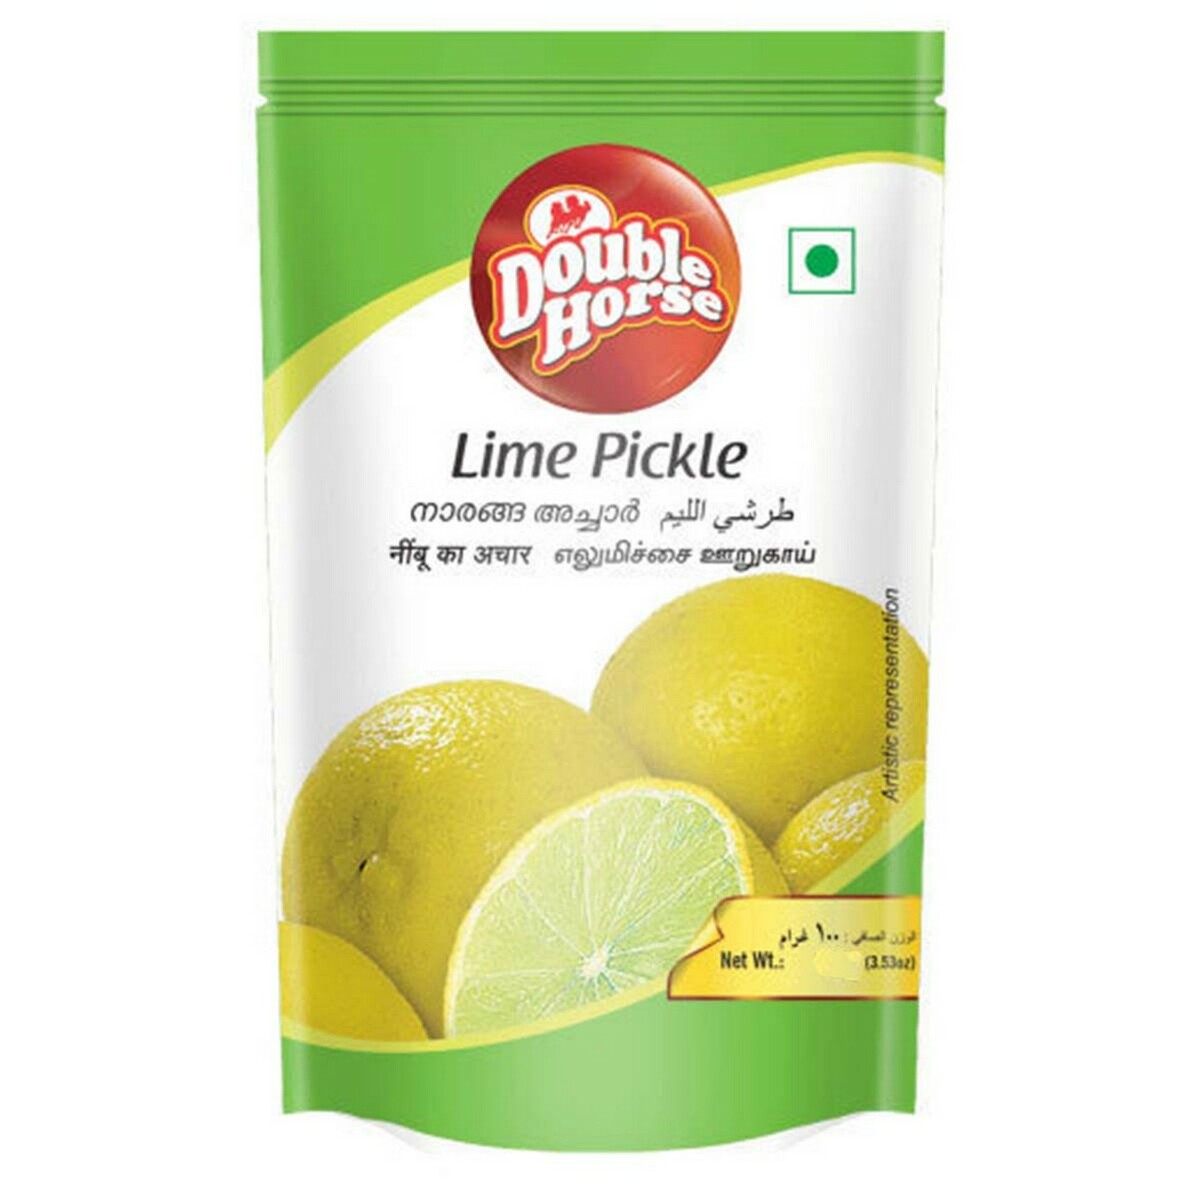 Double Horse Lime Pickle 200g